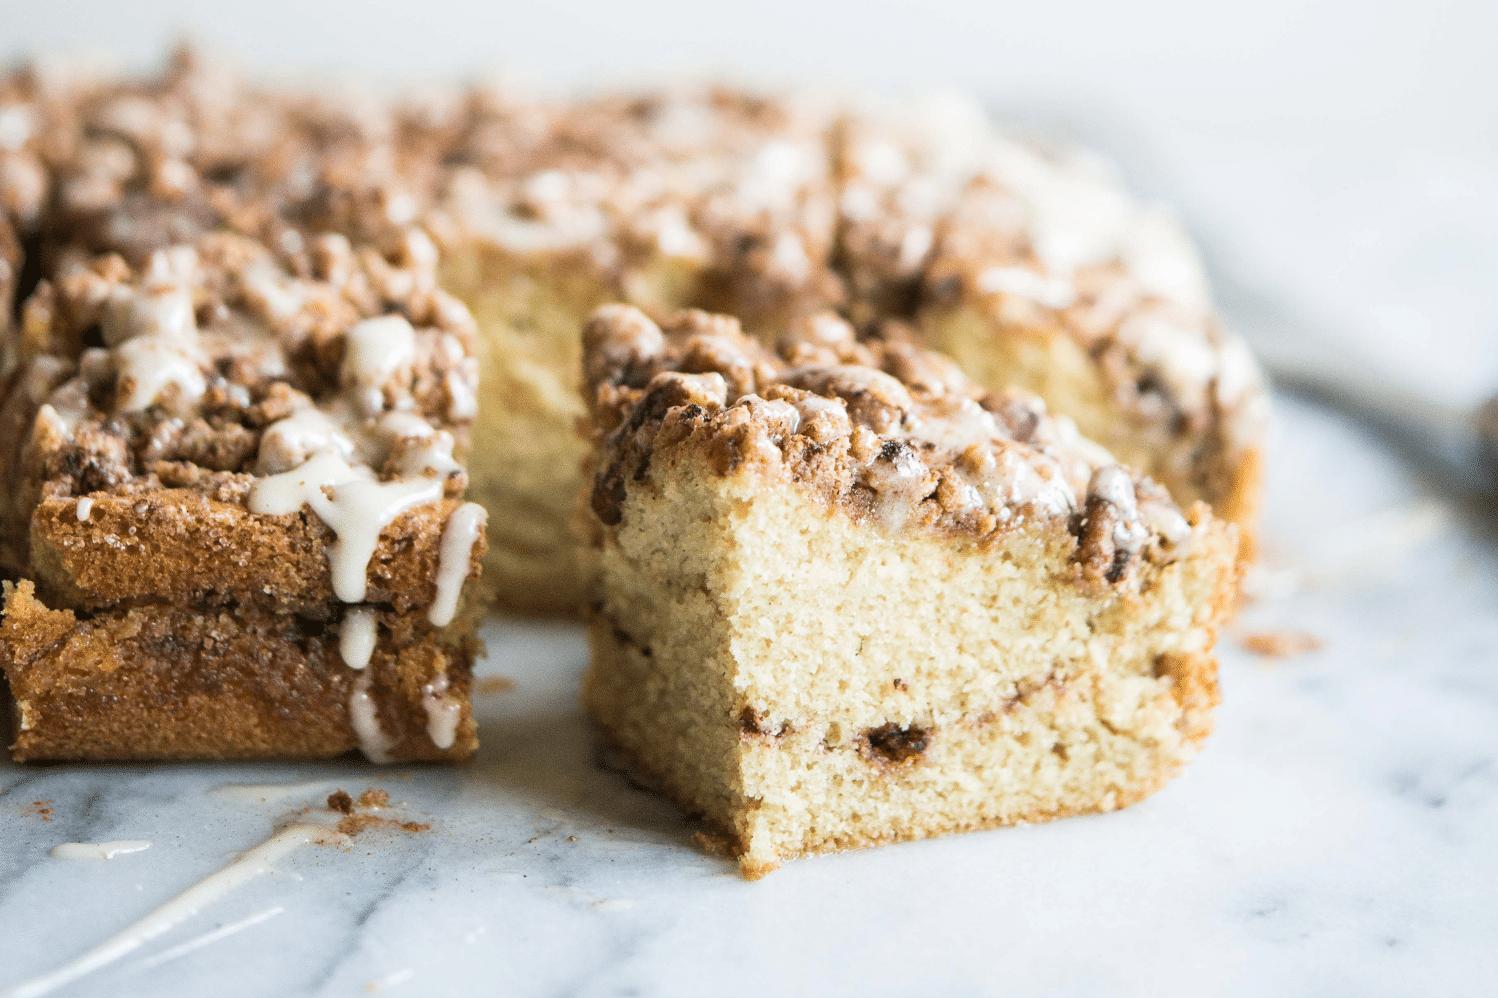  A slice of this coffee cake with a steaming-hot cup of coffee makes for the perfect breakfast combo.